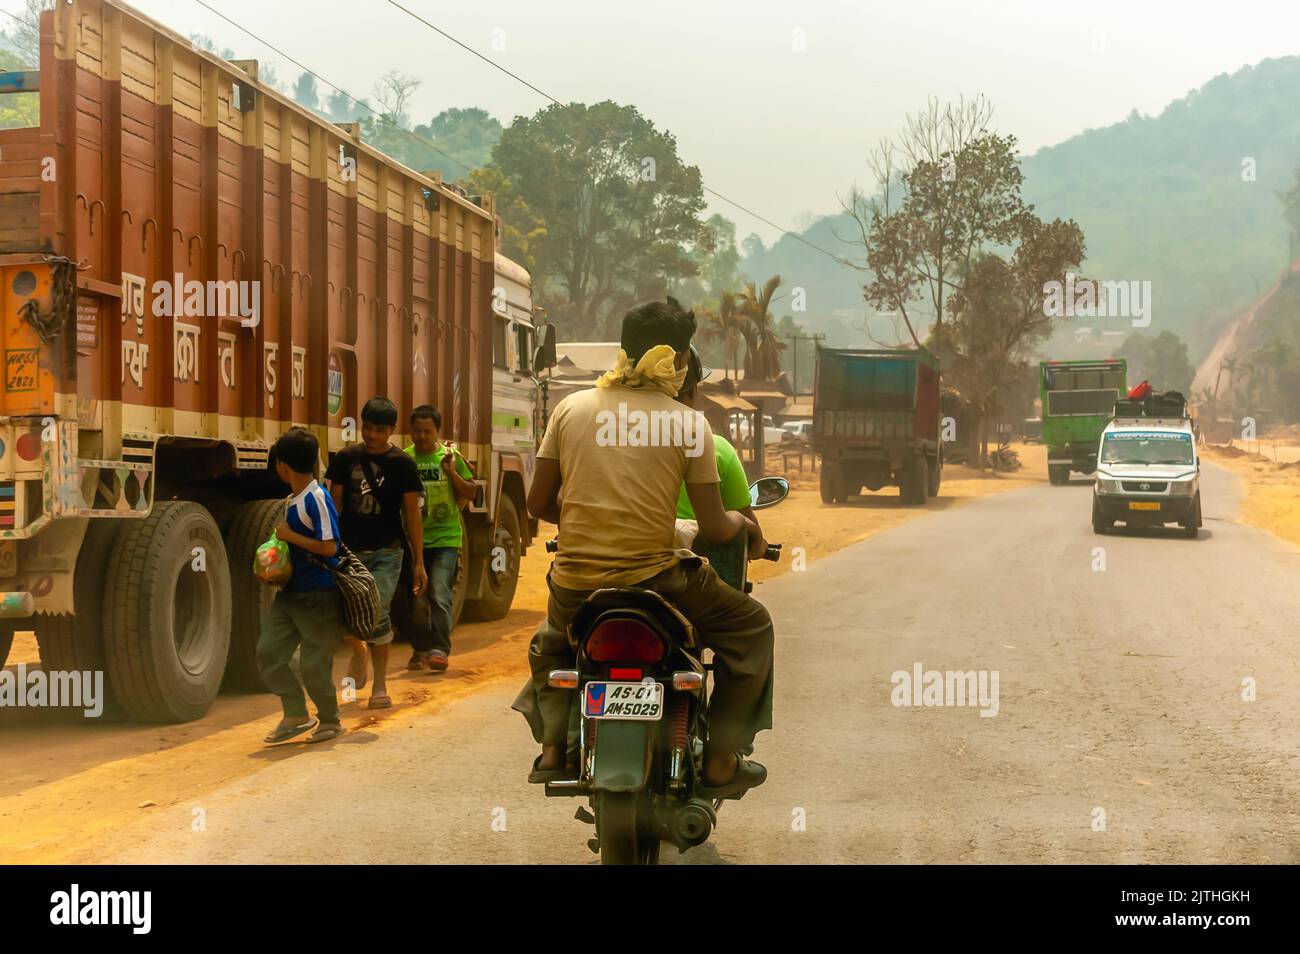 Vehicular traffic on an Indian highway. Stock Photo